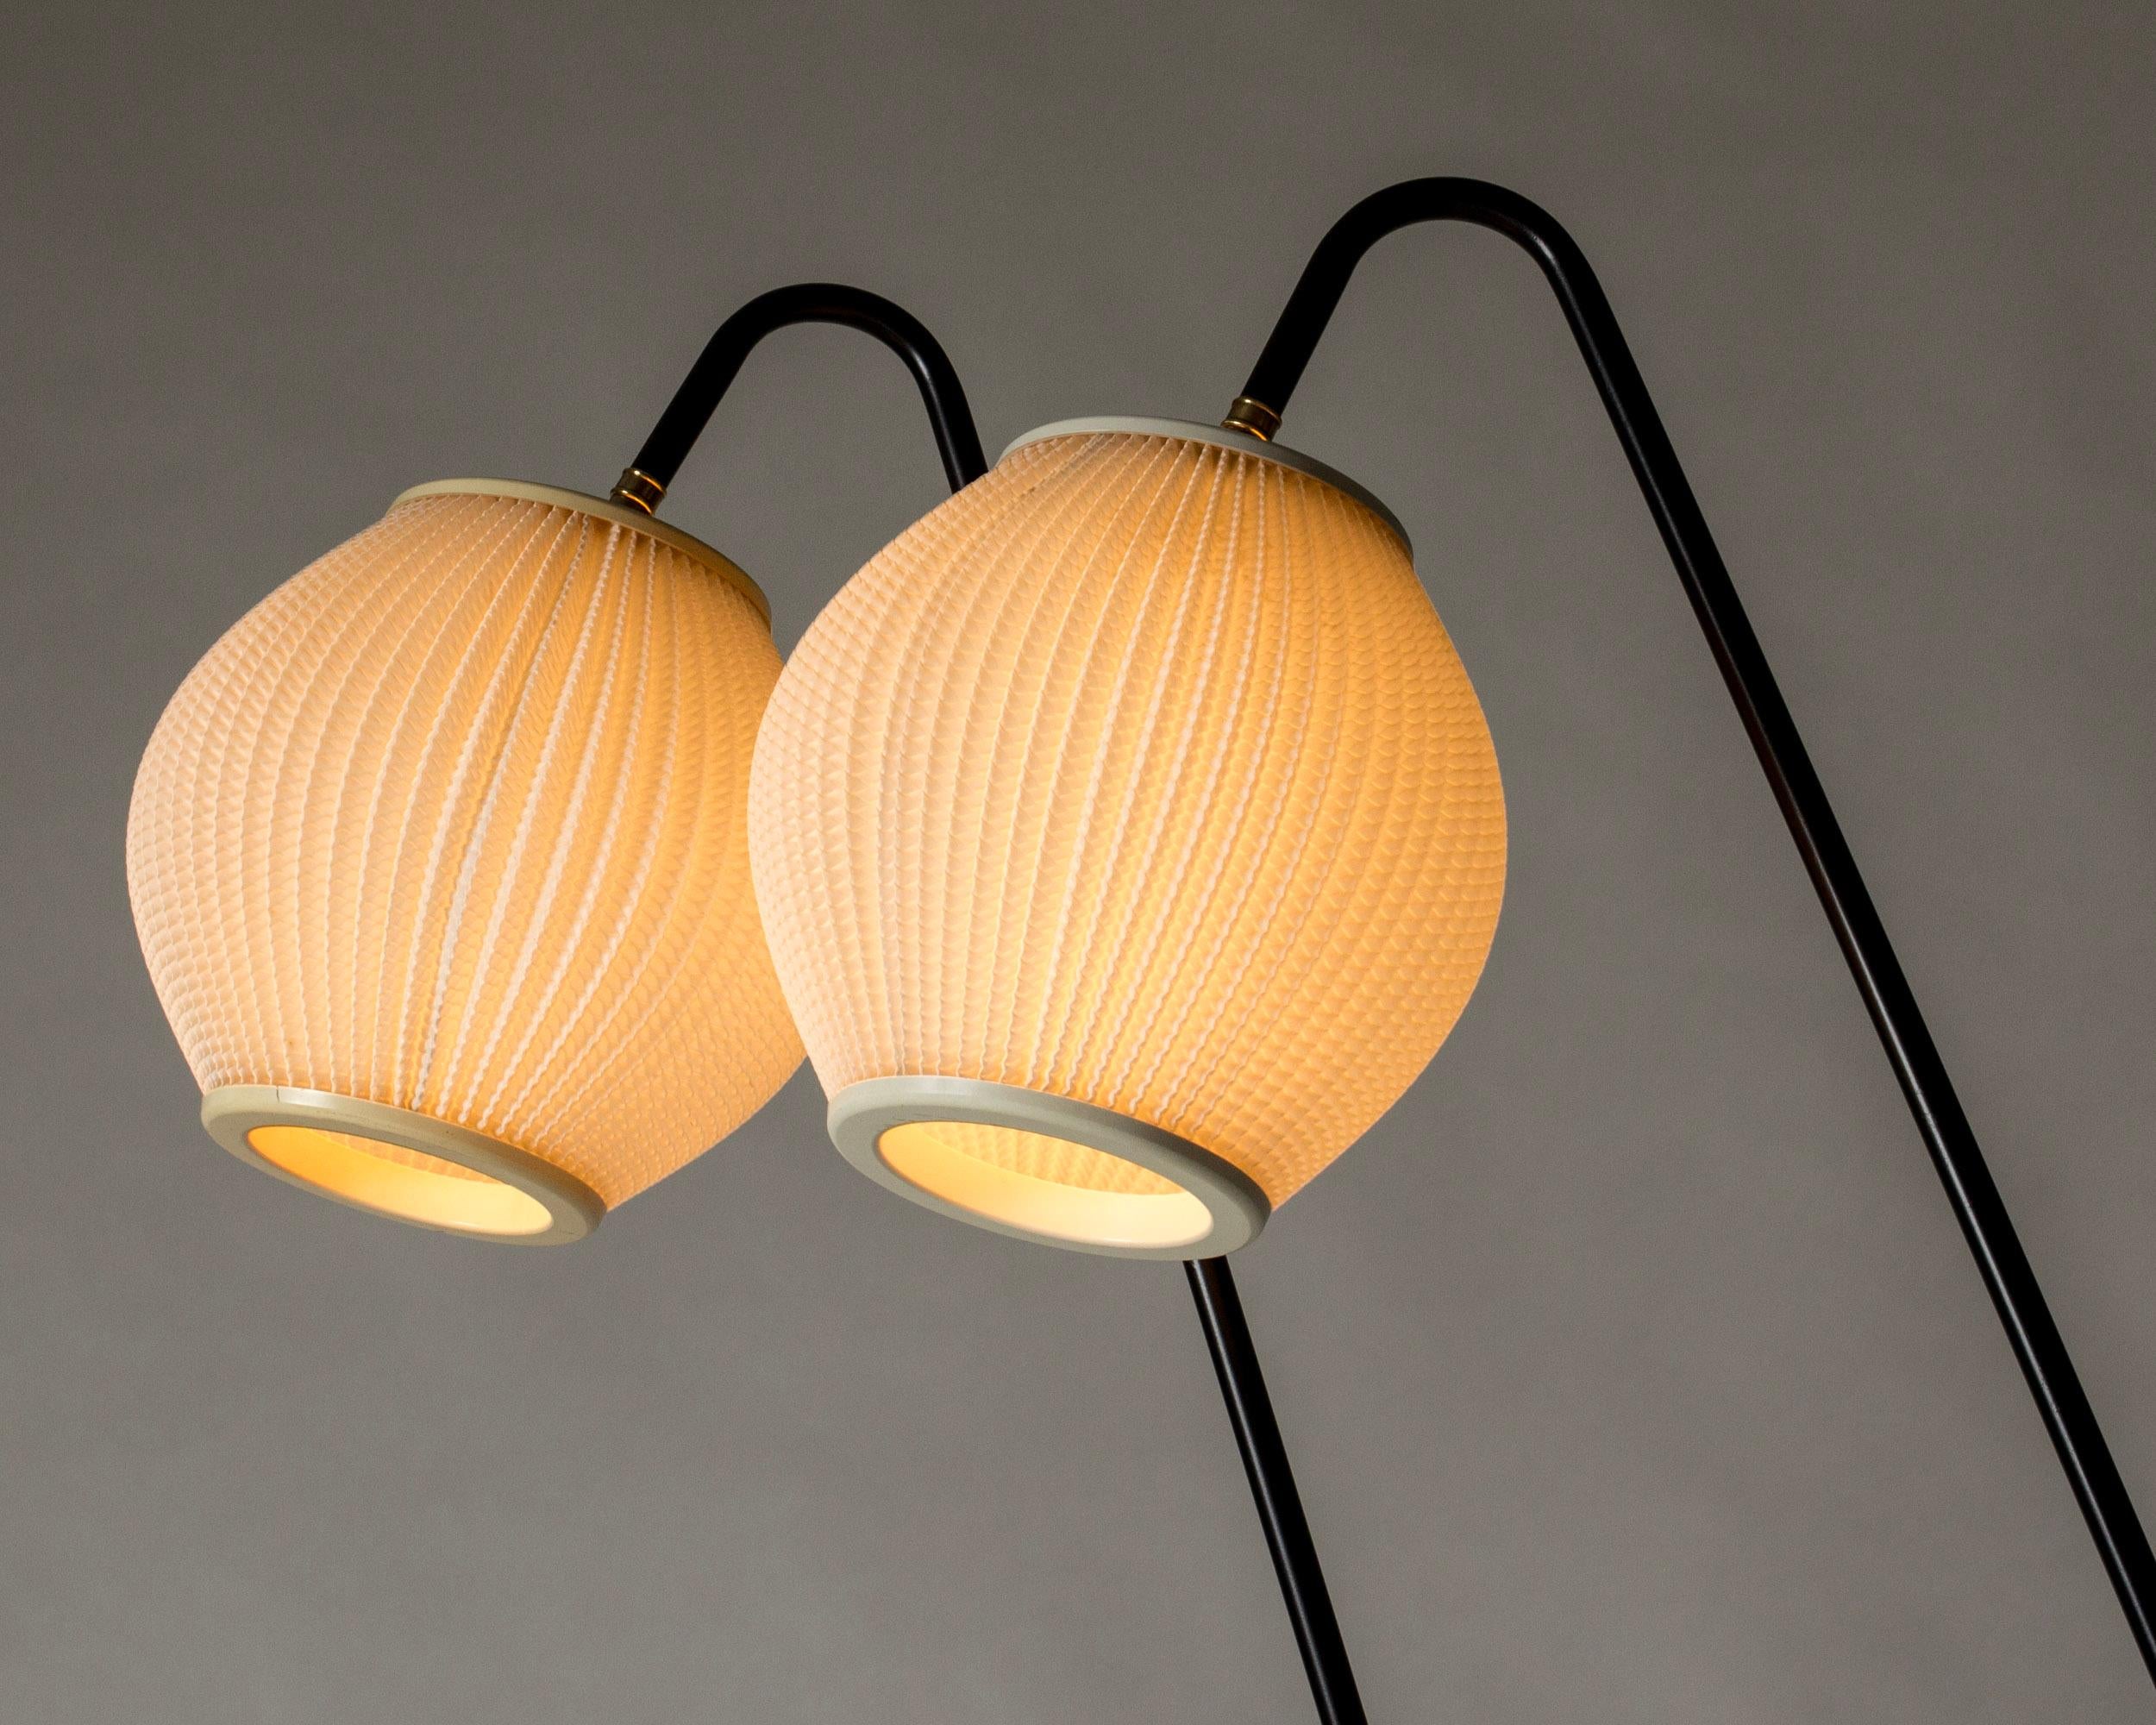 Pair of Modernist floor lamps by Svend Aage Holm Sørensen, Denmark, 1950s In Good Condition For Sale In Stockholm, SE